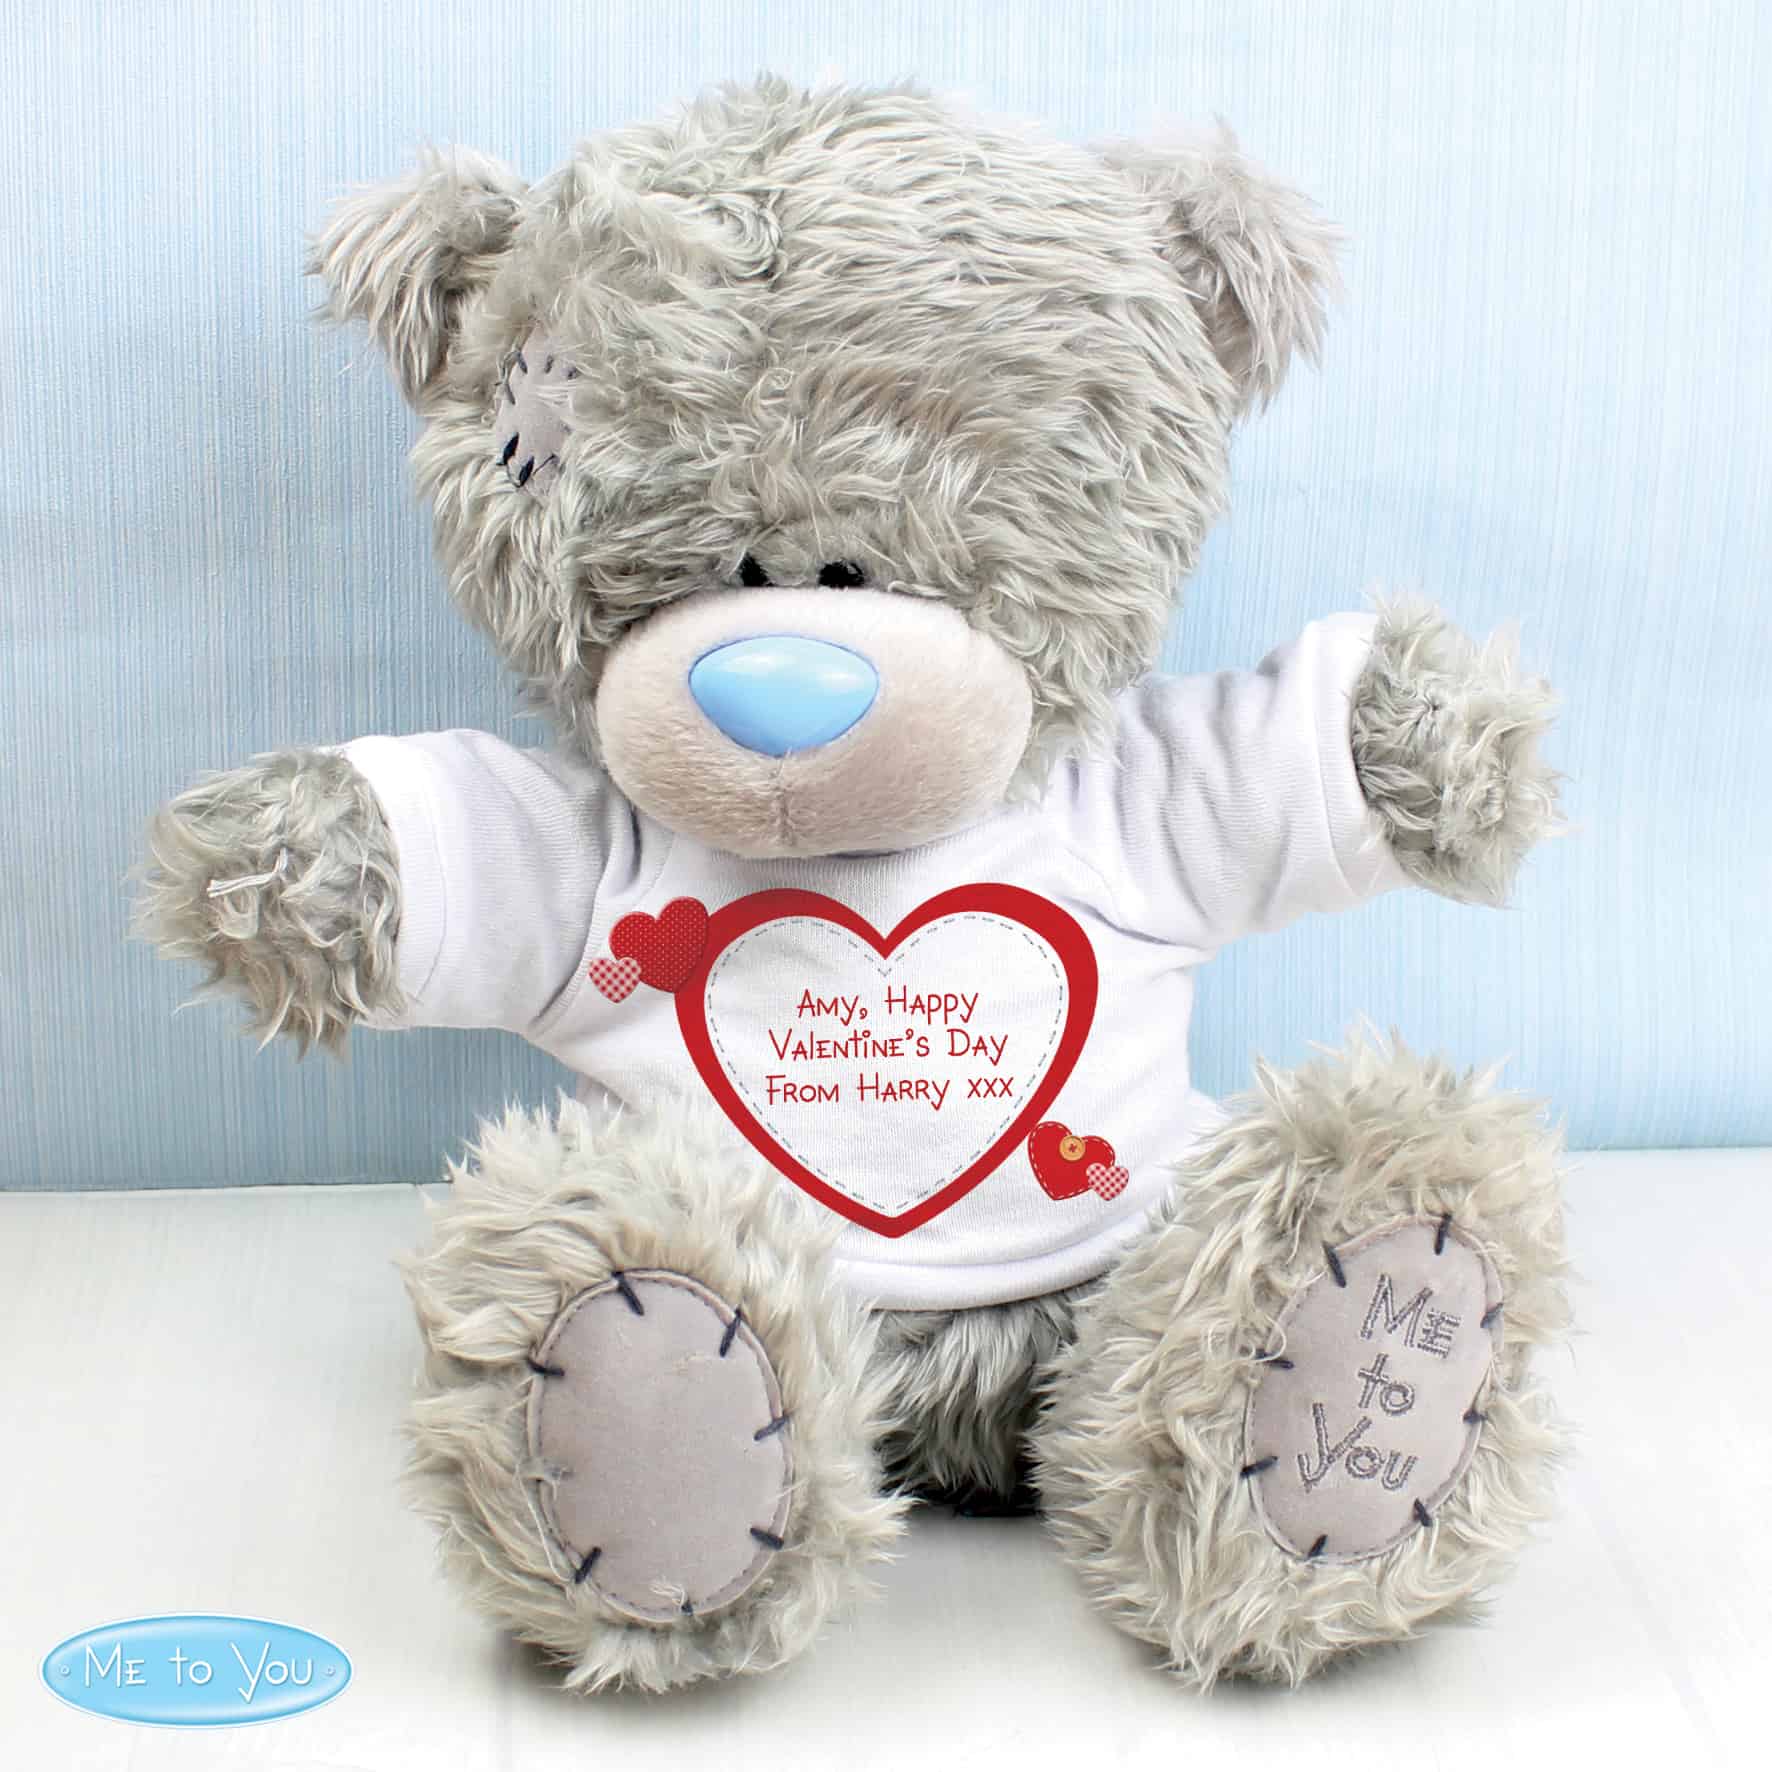 Me To You Teddy Bear. Personalised with any message over 3 lines in the centre of the white t-shirt. A great gift for any occasion - Valentine's Day, Birthday, Anniversary, Wedding etc